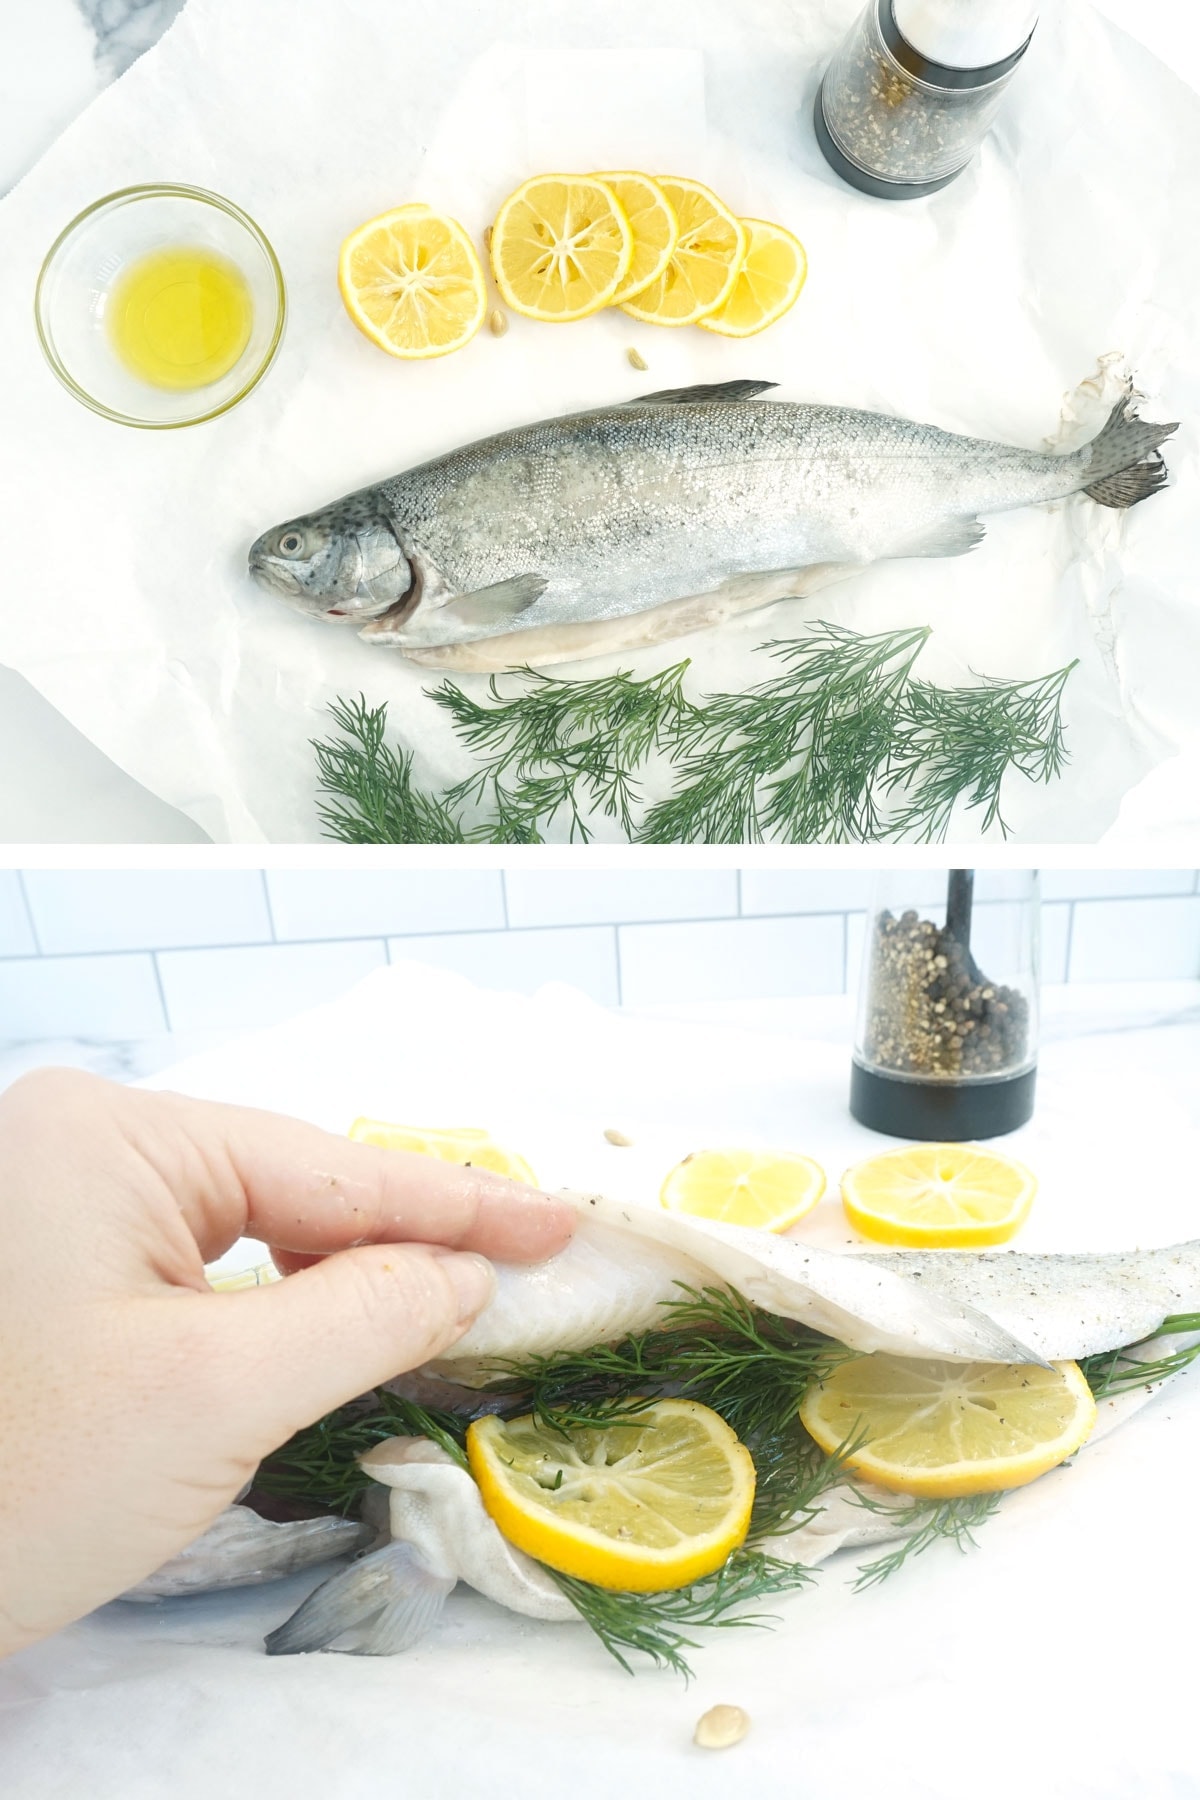 Stuff the raw fish with lemon and dill